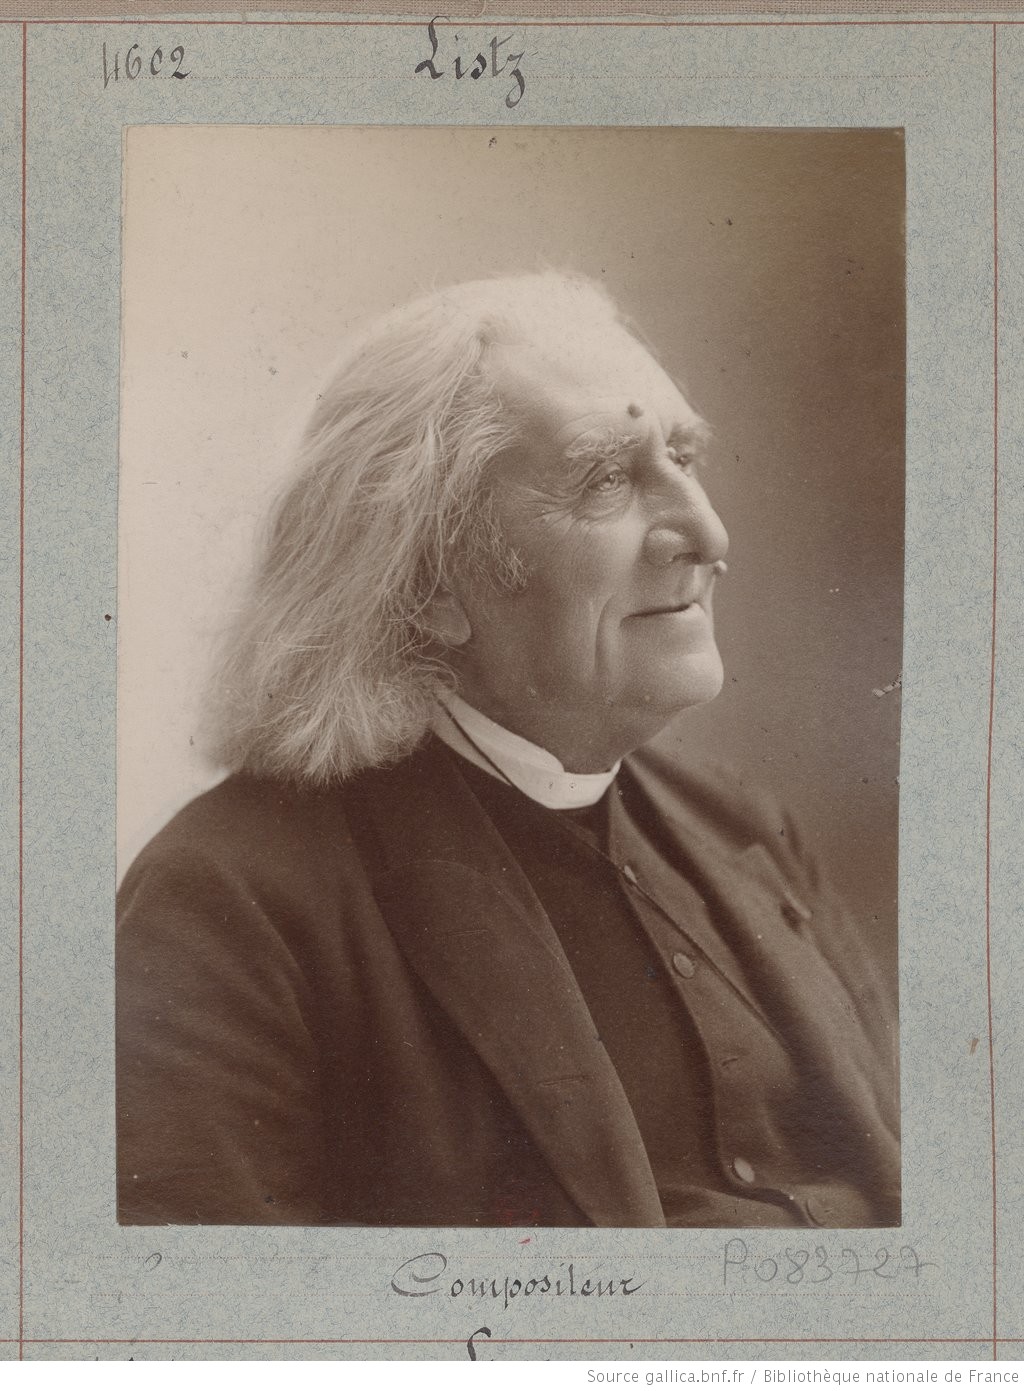 Liszt portrait number 5 in black and white taken by Nadar